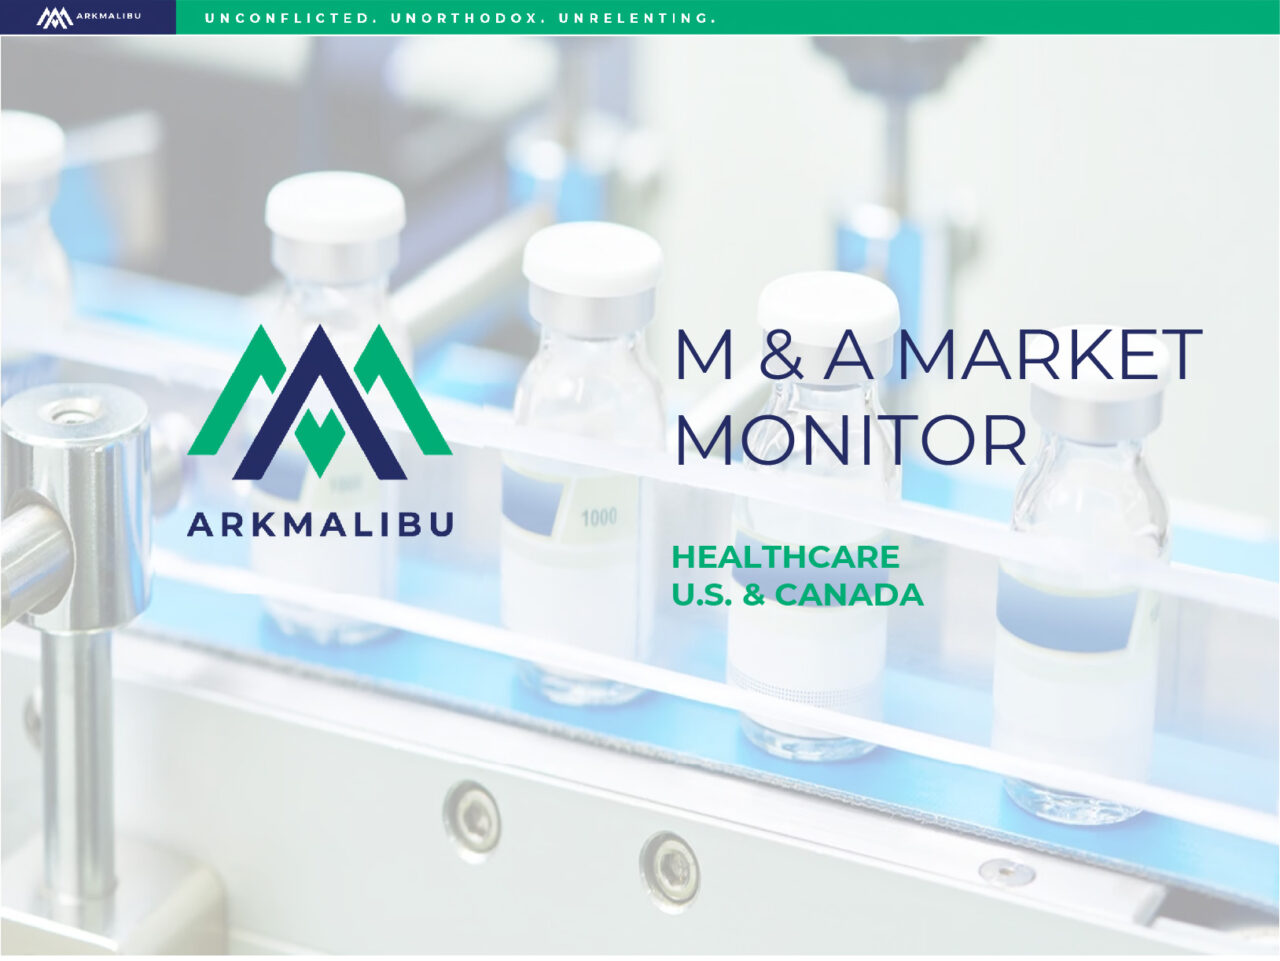 Market Monitor Cover for Healthcare. Faded Image of medication on a stand in the background